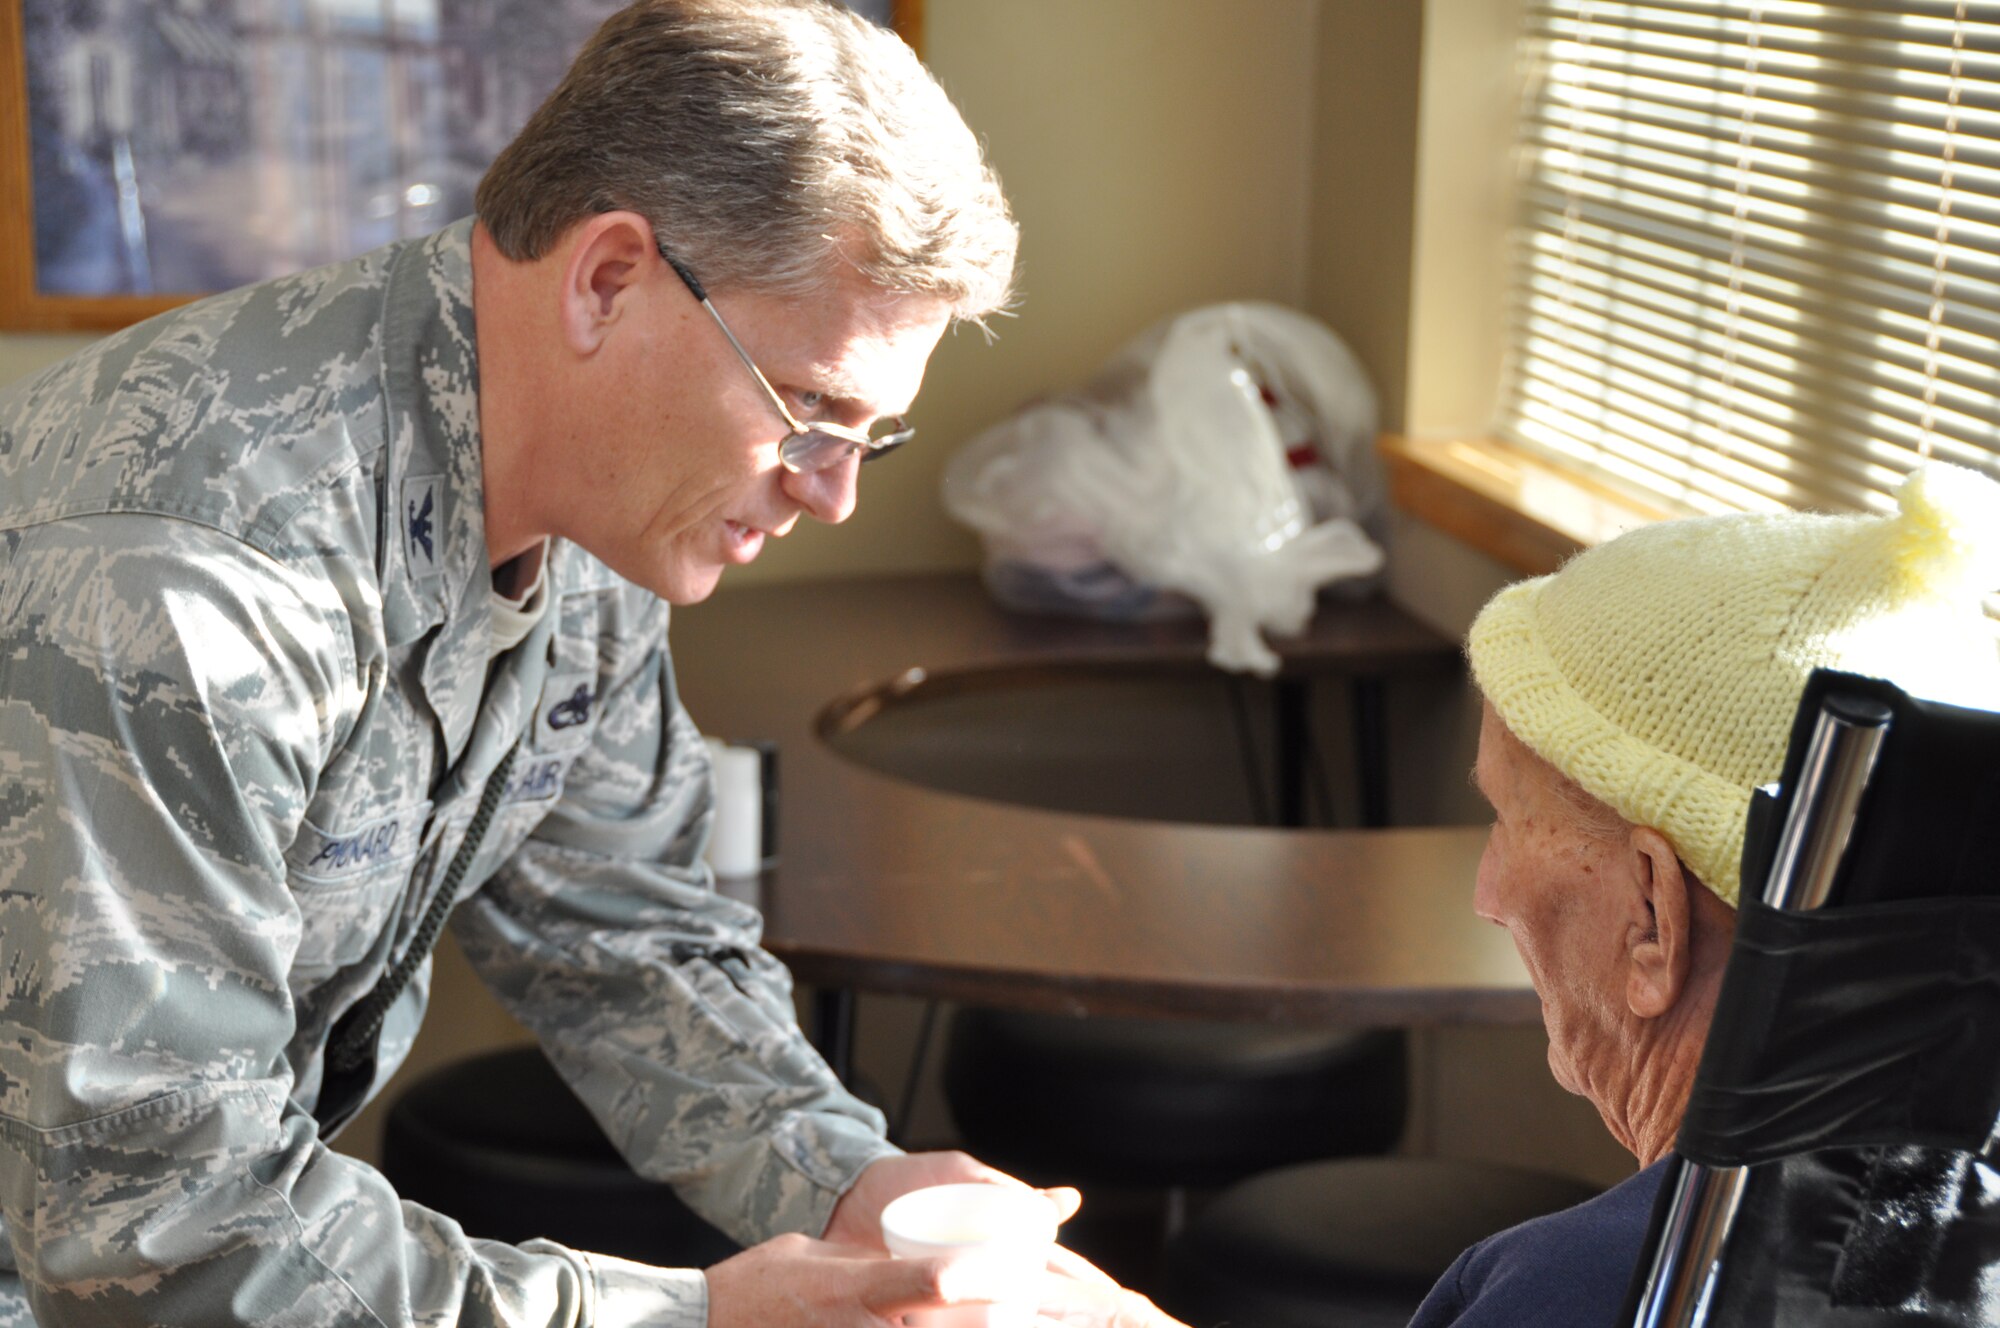 Col. Jeffrey Pickard, 507th Maintenance Group Commander offers a cup of hot chocolate to World War II veteran Albert Keim at the Norman Veterans Center recently.  Keim, who arrived in Normandy, France four days after D-Day, was one of many veterans on hand taking part in the annual Christmas Party.  Over $4,000 was raised by members of the 507th Air Refueling Wing for gifts to be donated to the veterans.  Members of the 507th have been donating gifts since the center opened in 1996.  (Photo by Senior Airman Mark Hybers)